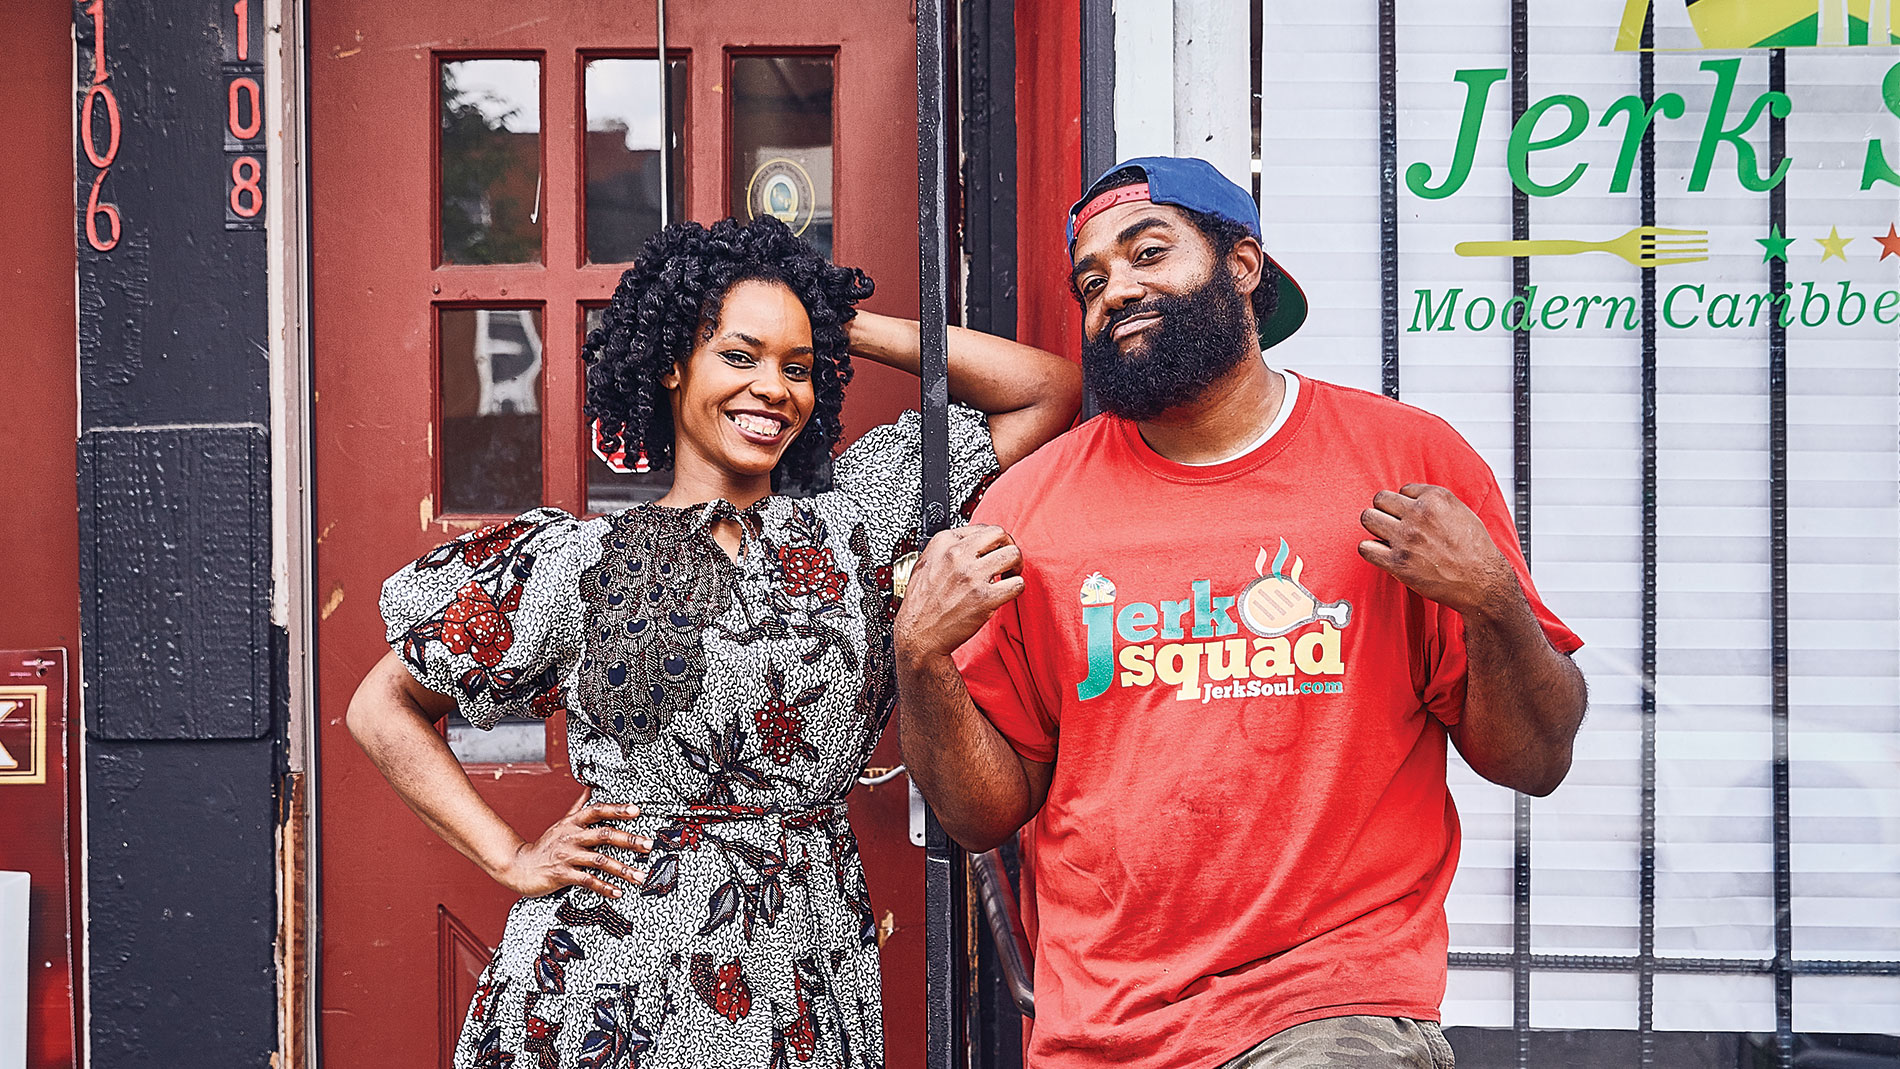 from left, jerk soul owners zahra spencer and telie woods 